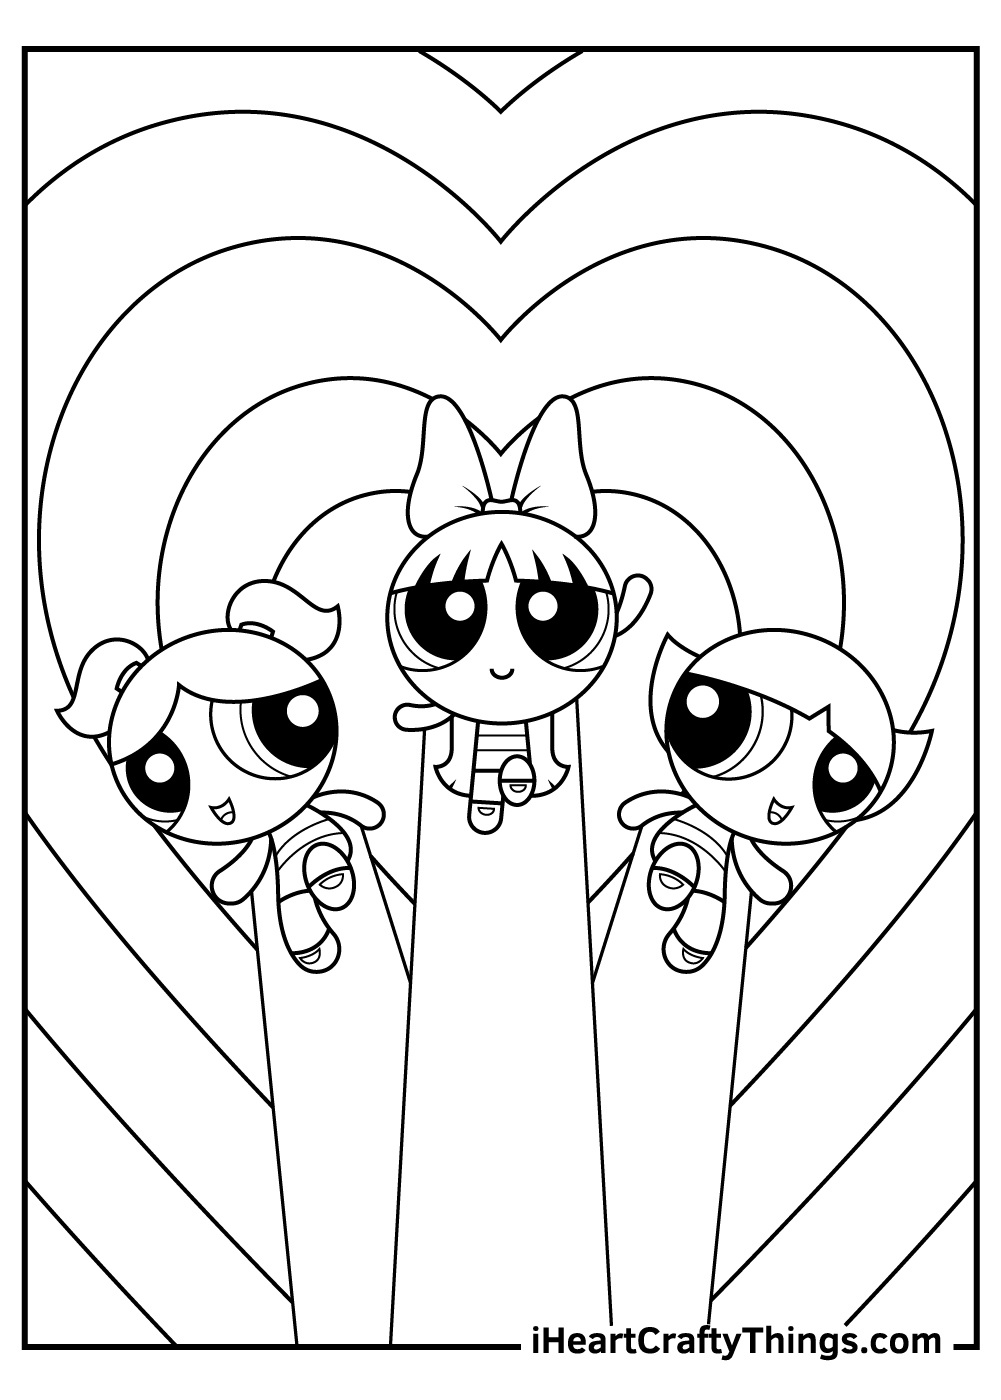 Powerpuff Girls Coloring Pages   I Heart Crafty Things